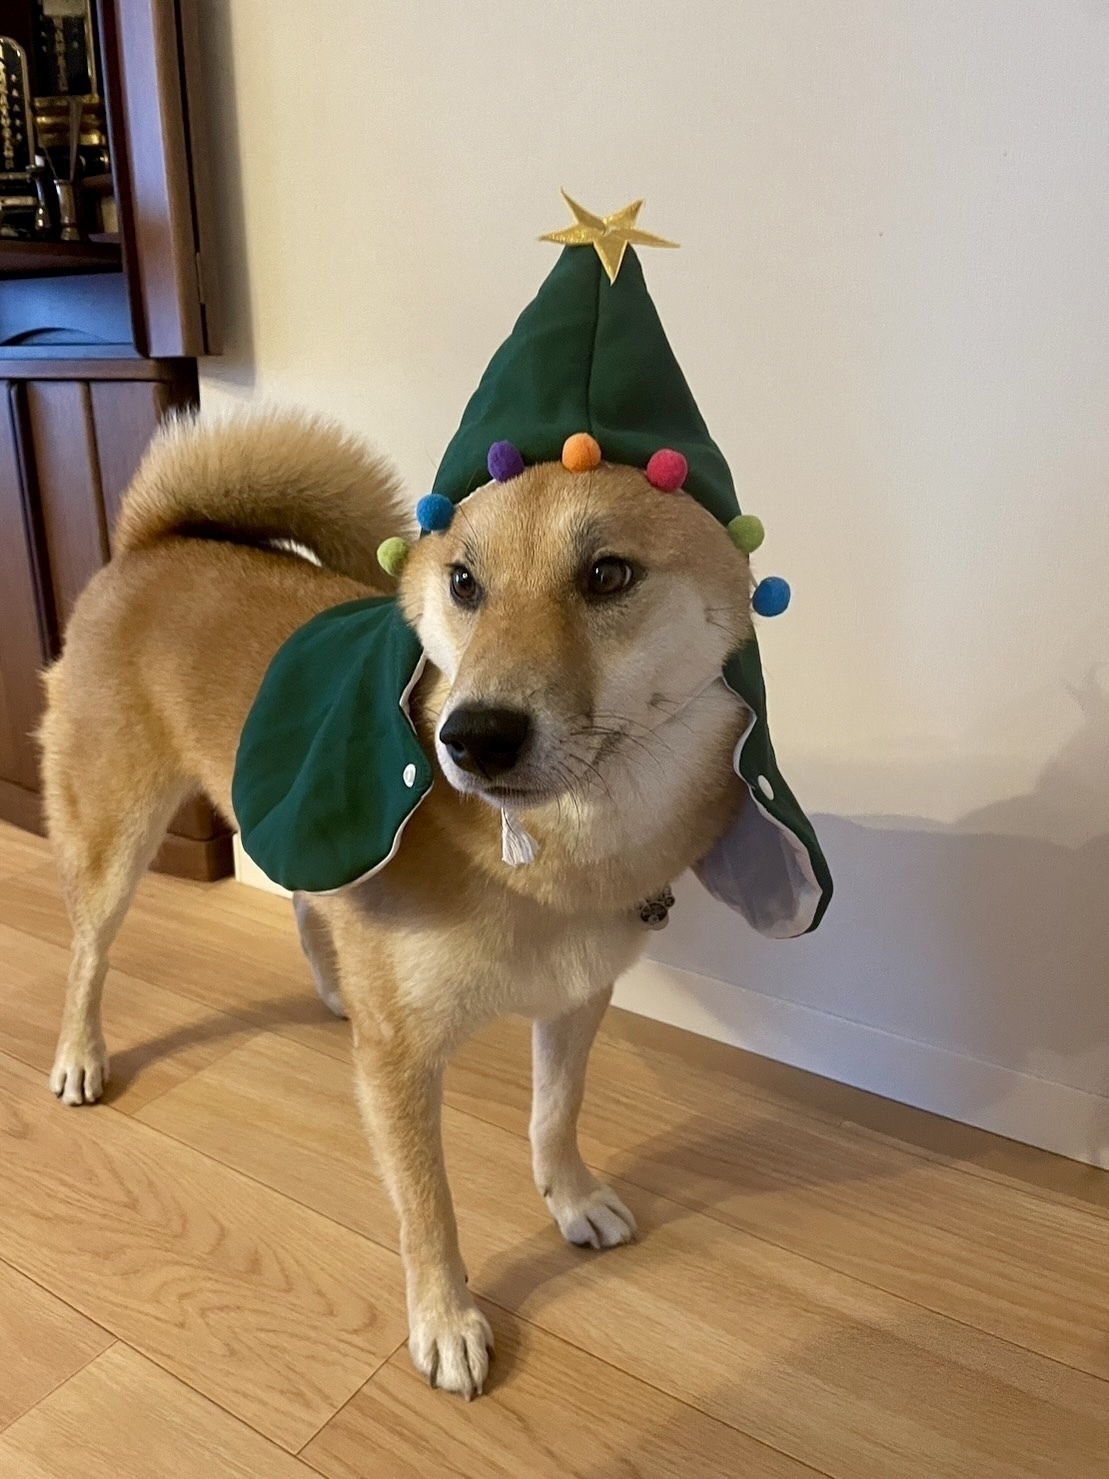 A Shiba dog in a Christmas Tree outfit. 